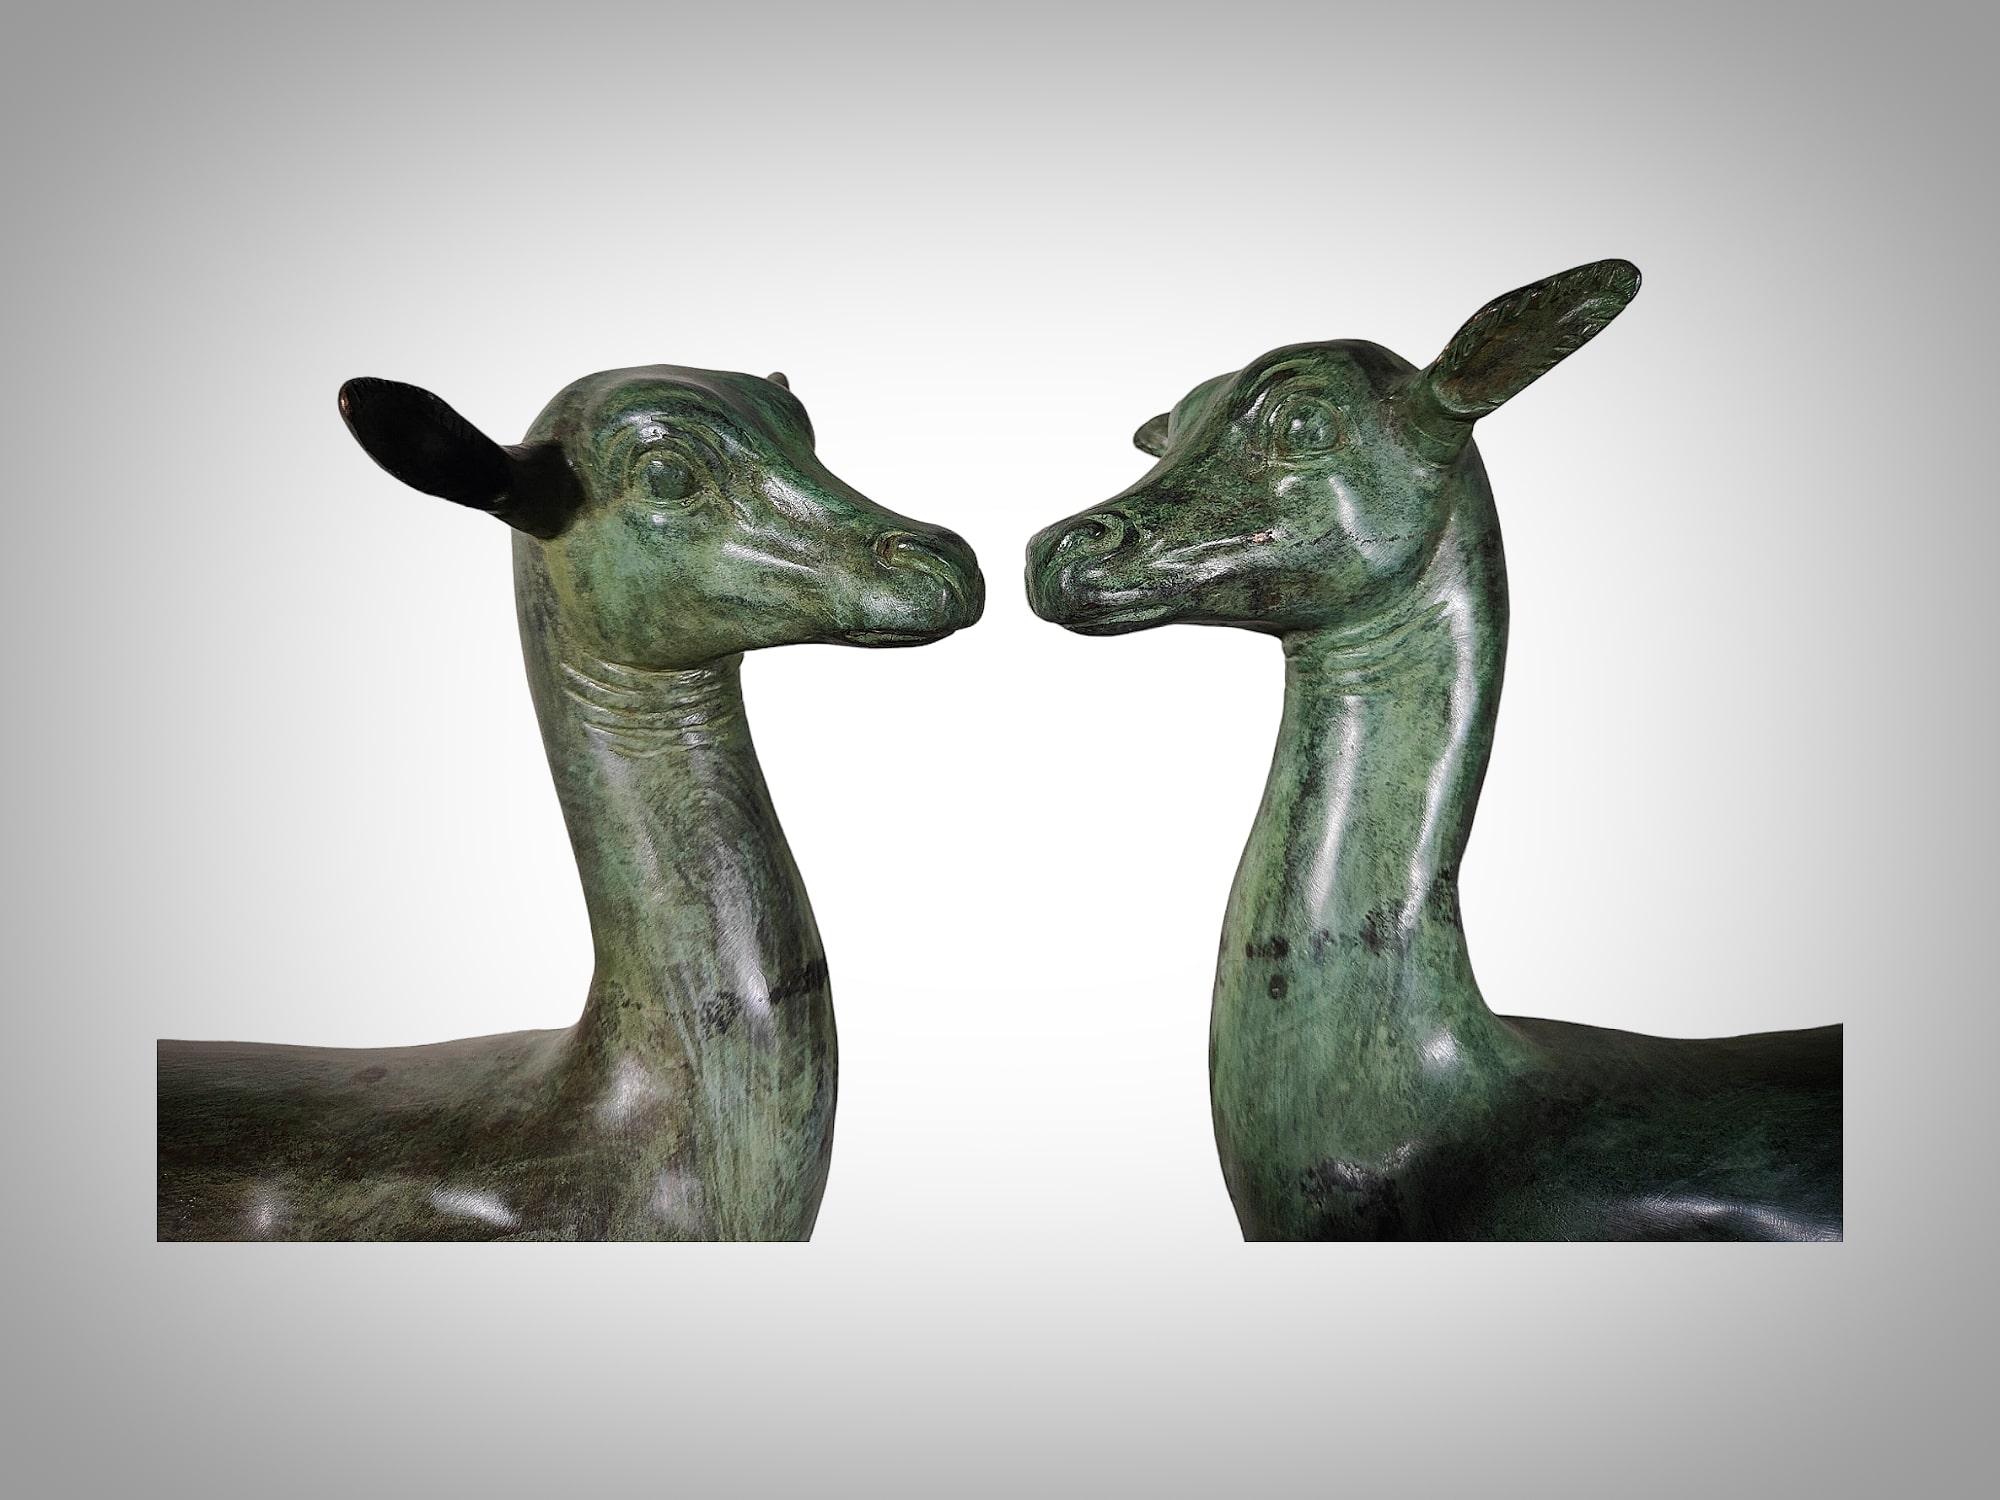 Small Pair Of Pompeian Deer From Herculaneum
Pair of young deers after the antique.
Patinated bronze.
Early 20th century.

This pair of young deers is a reproduction of the originals kept in the Archaeological Museum of Napoli under the inventory